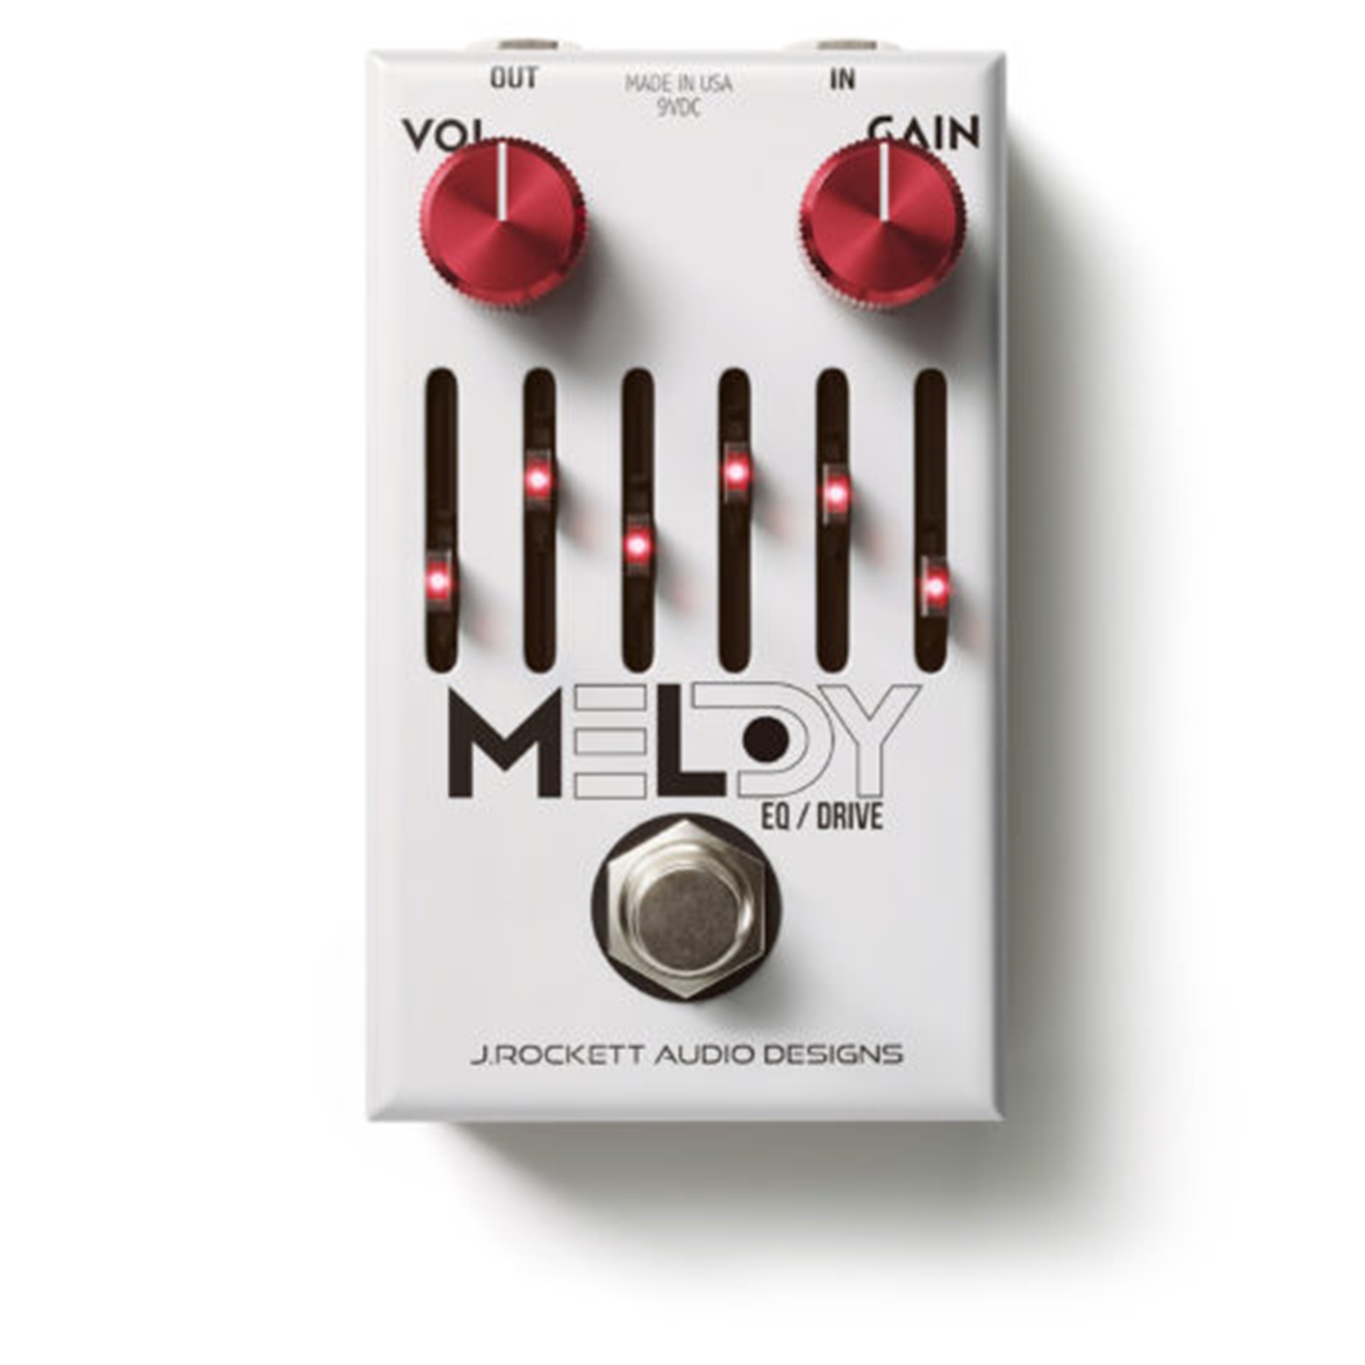 J.Rockett Audio Designs The Melody Overdrive Pedal